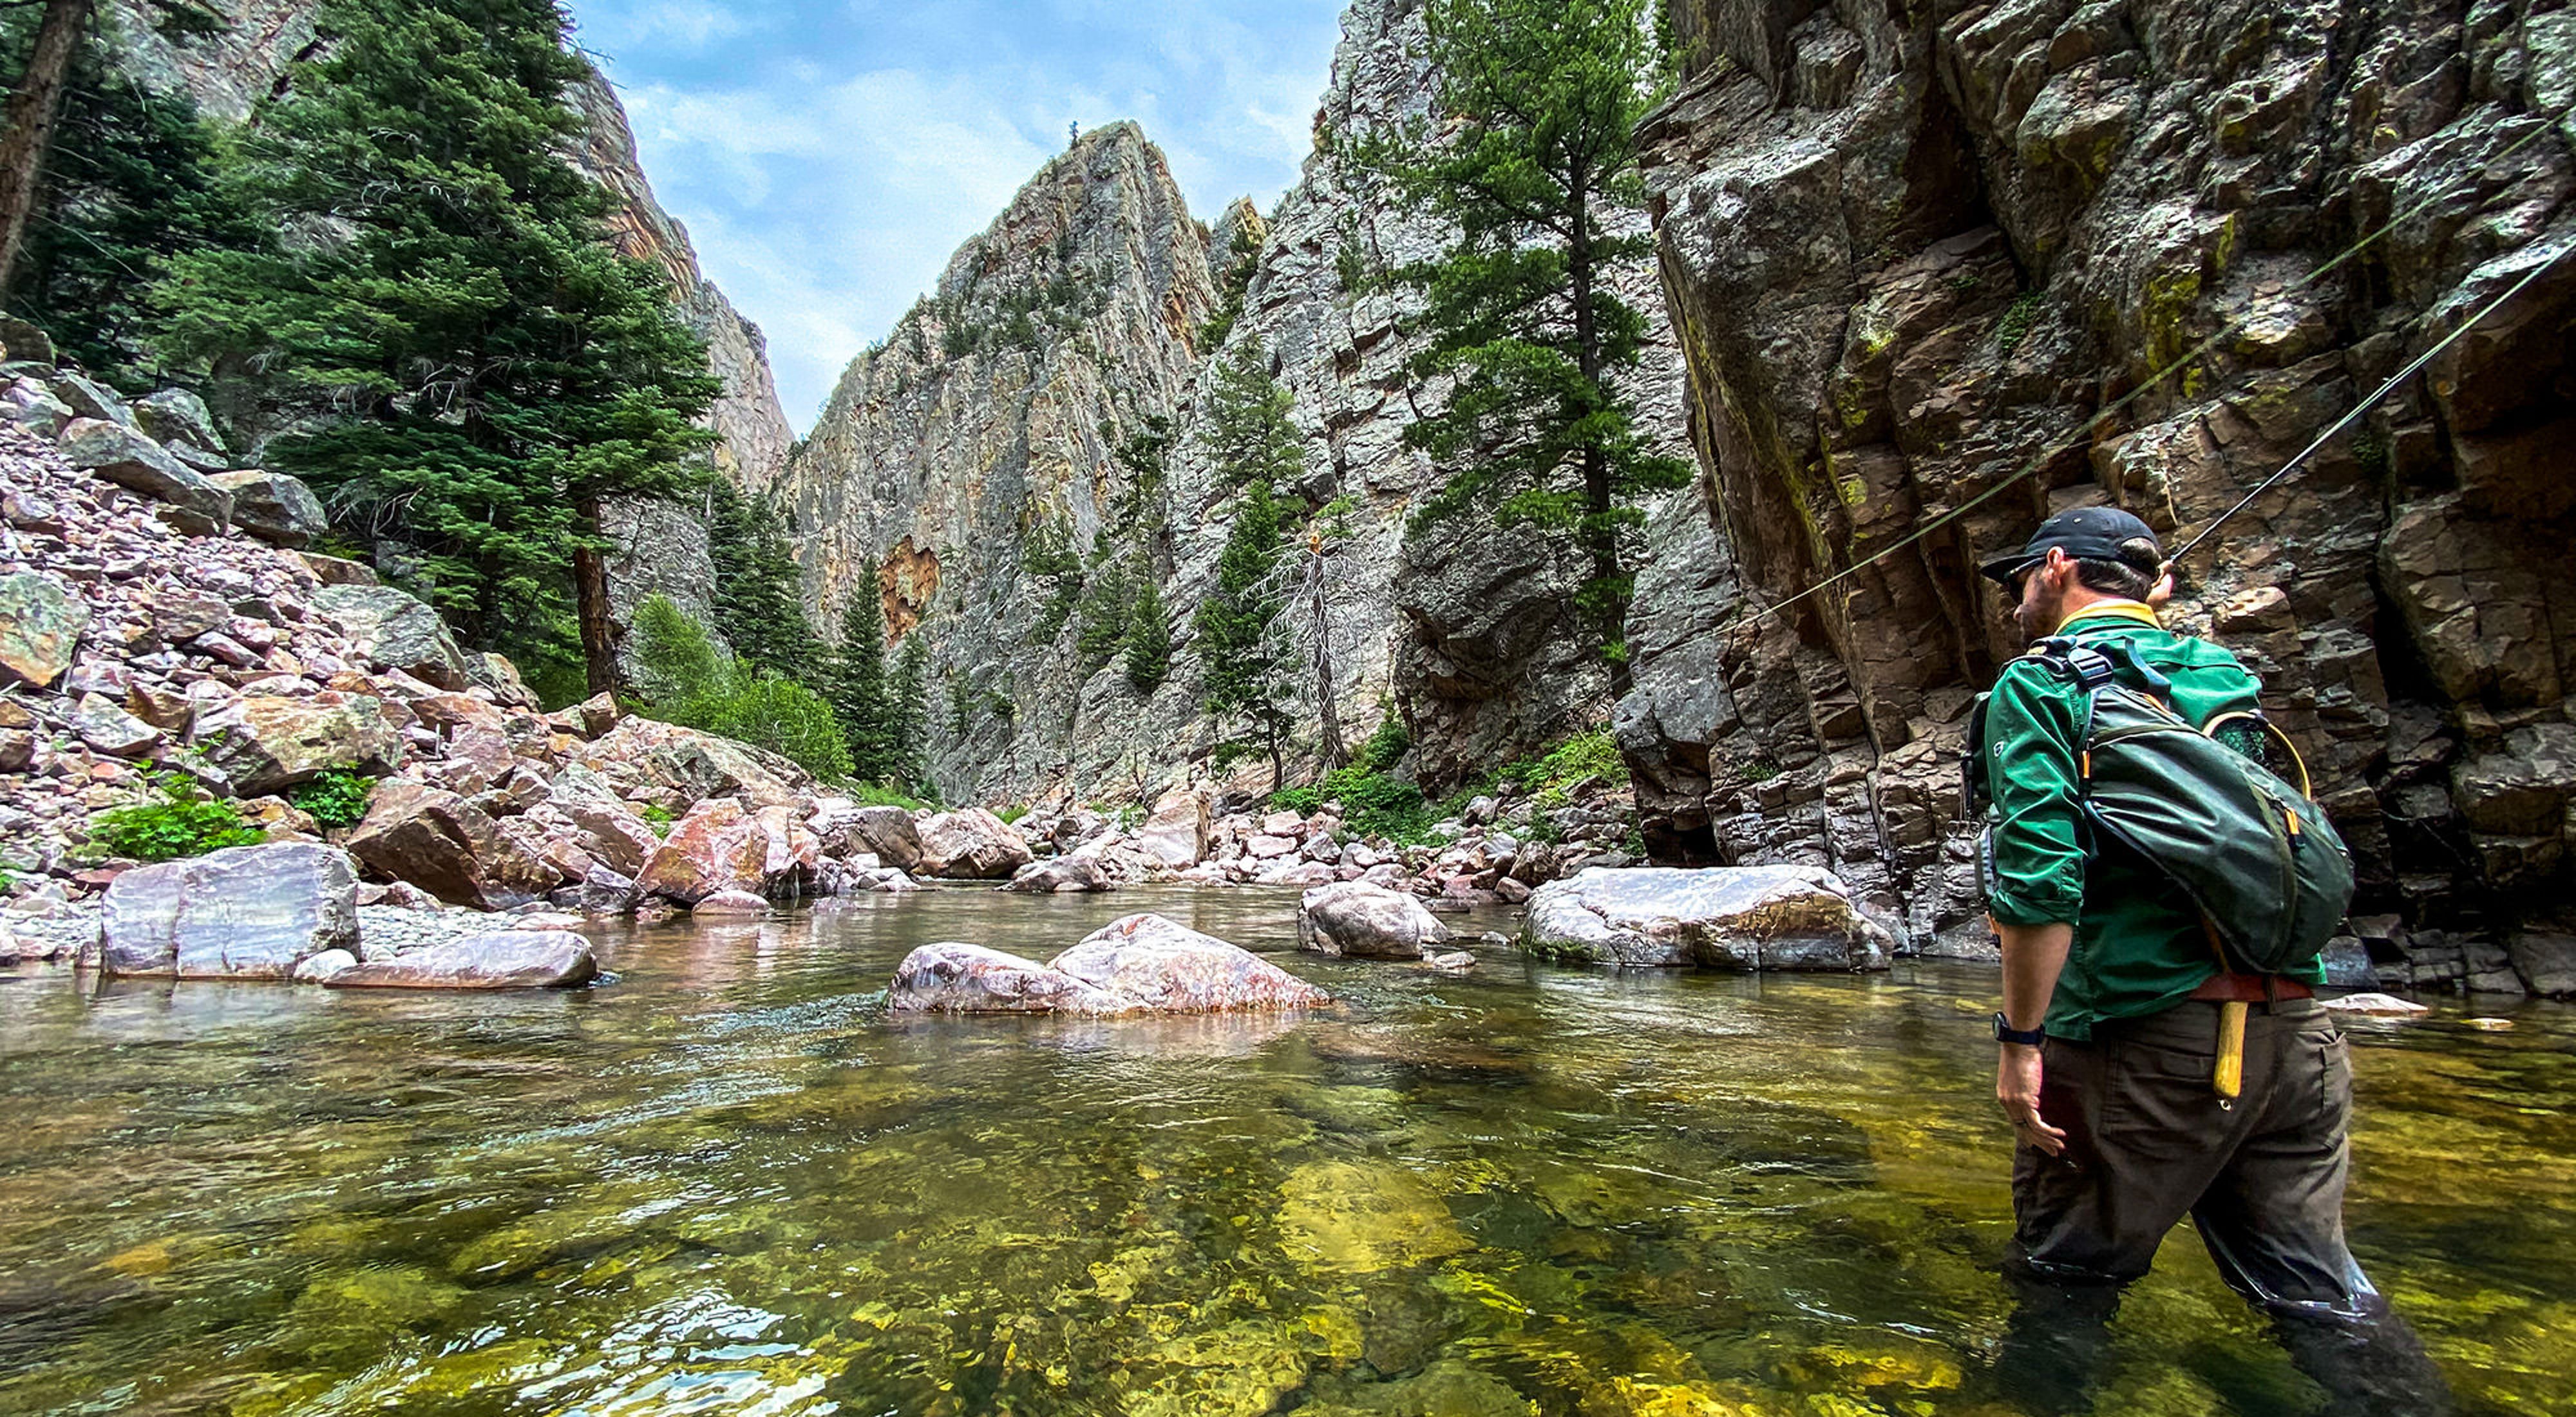 A man wearing a backpack wades through clear water in a rocky canyon.